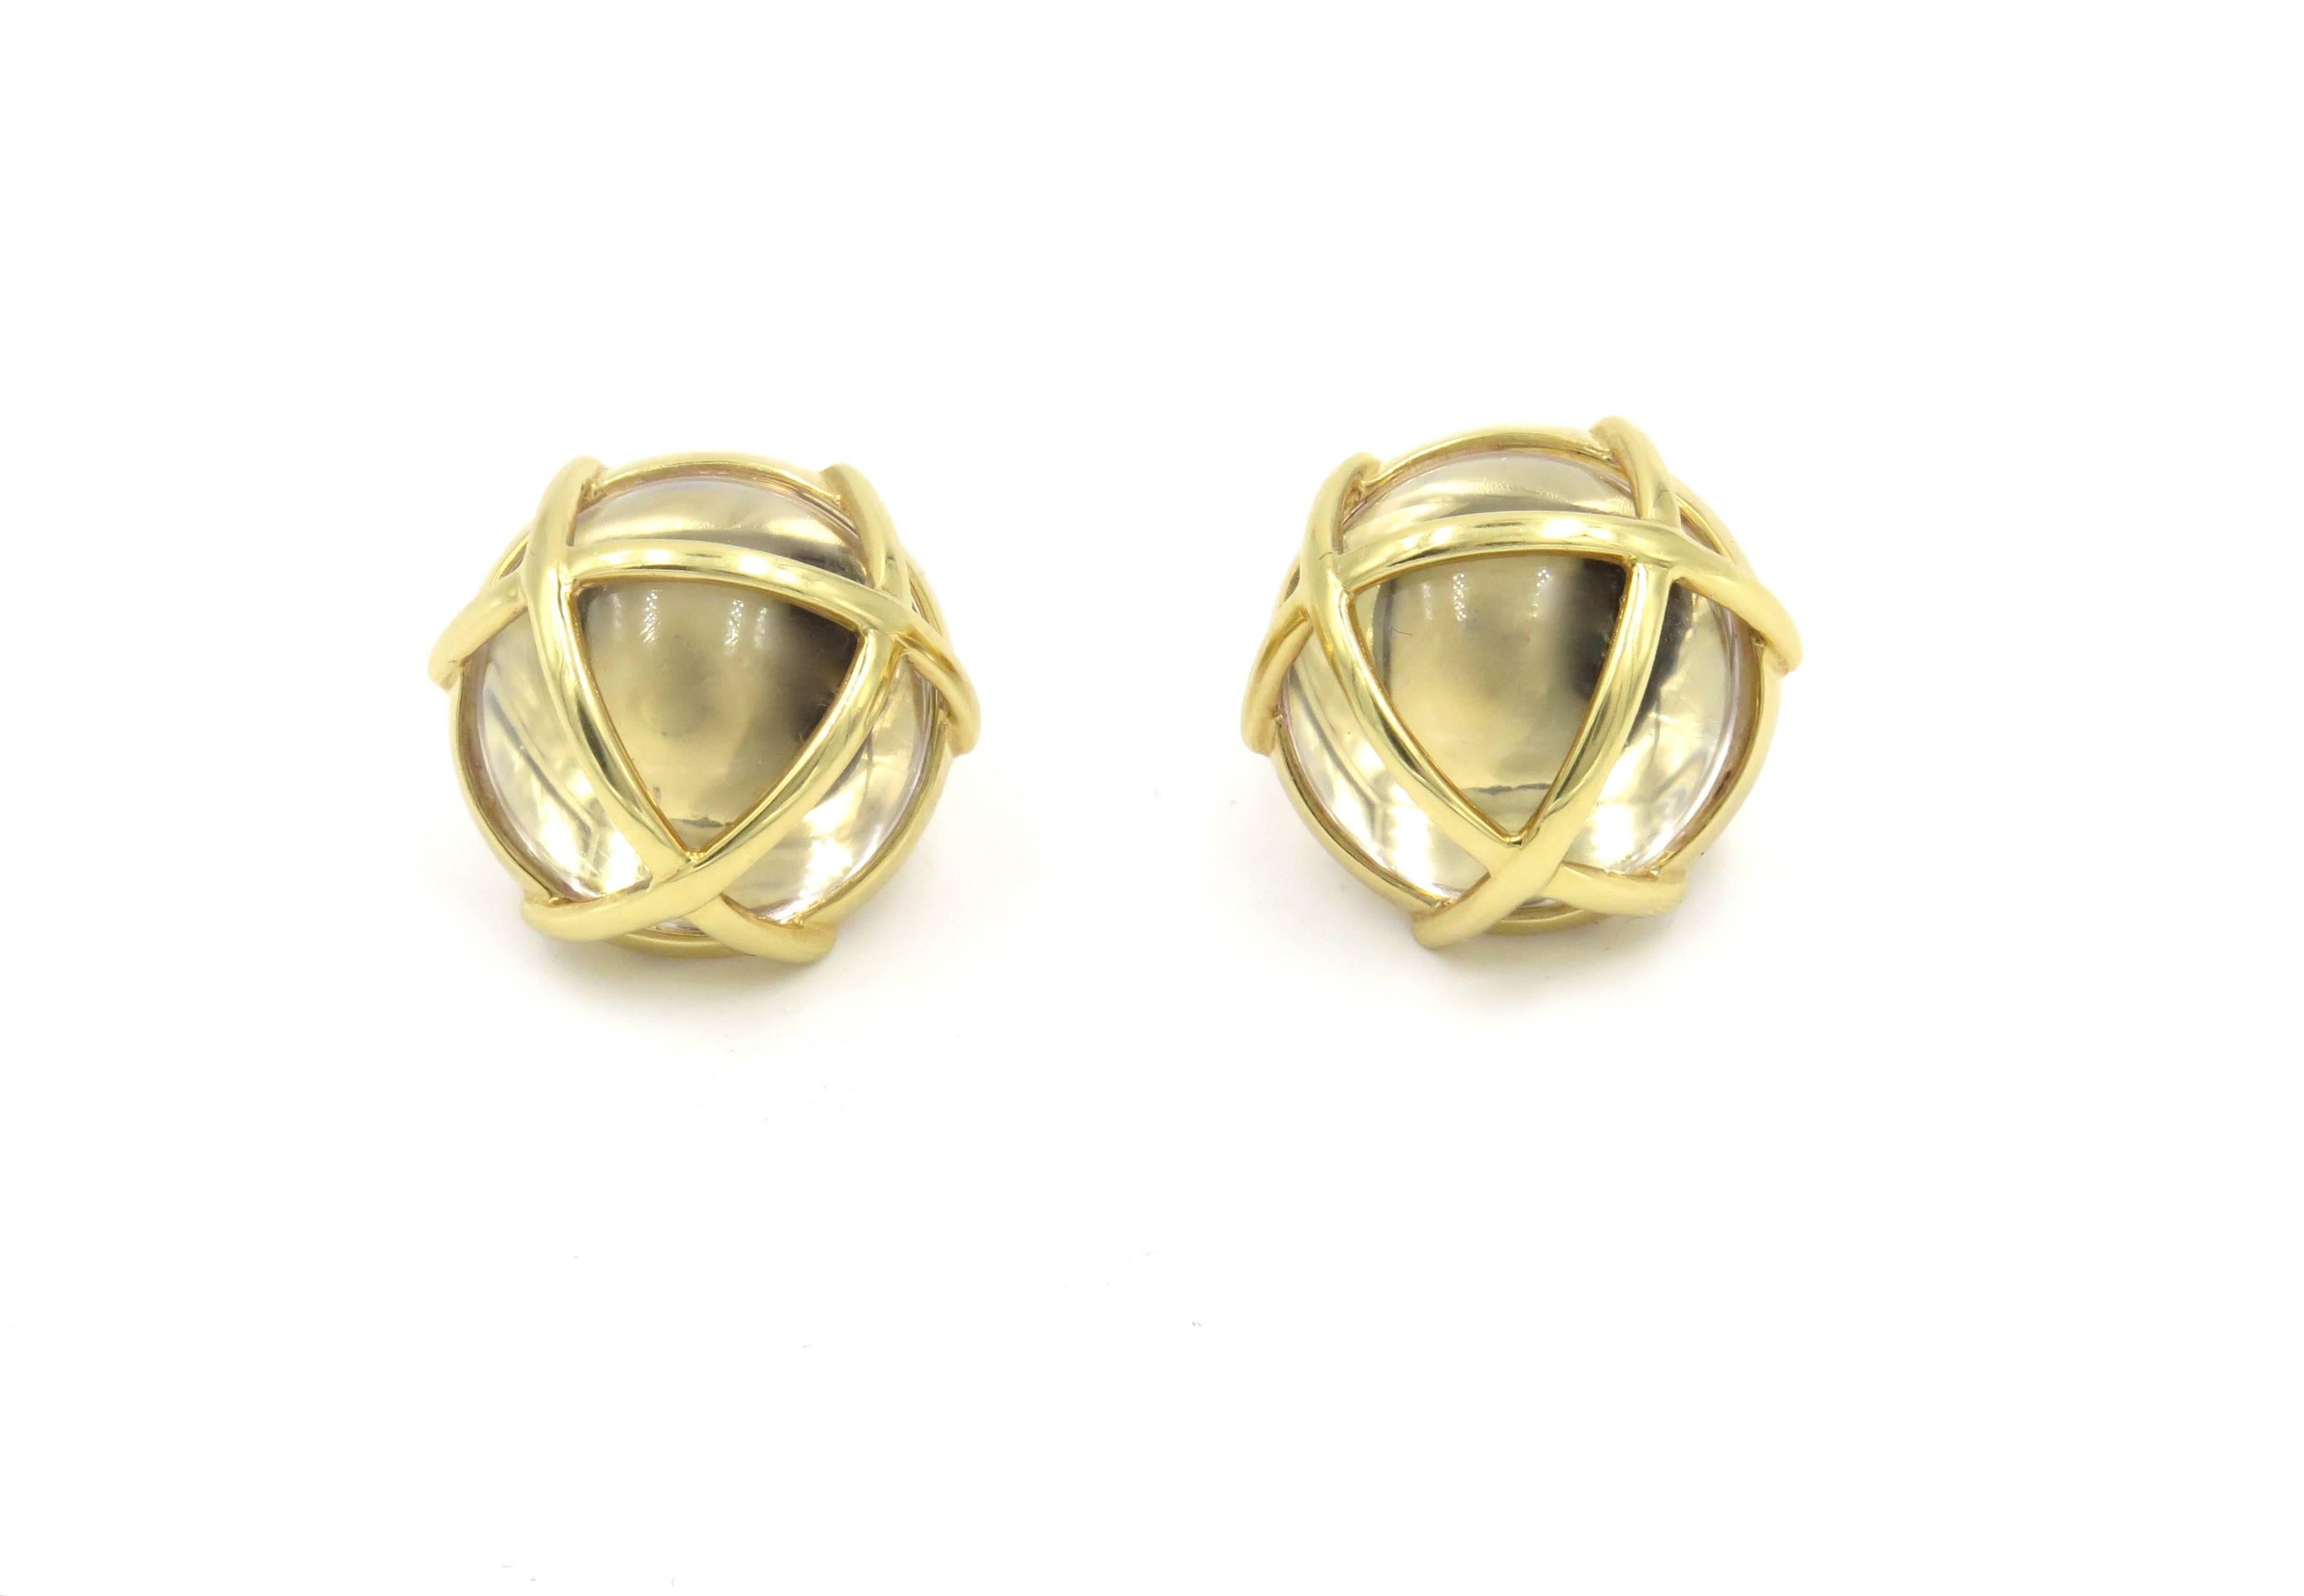 A pair of 18 karat yellow gold and rock crystal earrings.  Verdura.  The design is referred to as Caged.  Each designed as a rock crystal dome encased in polished gold cage. Diameter is approximately 3/4  grams.
